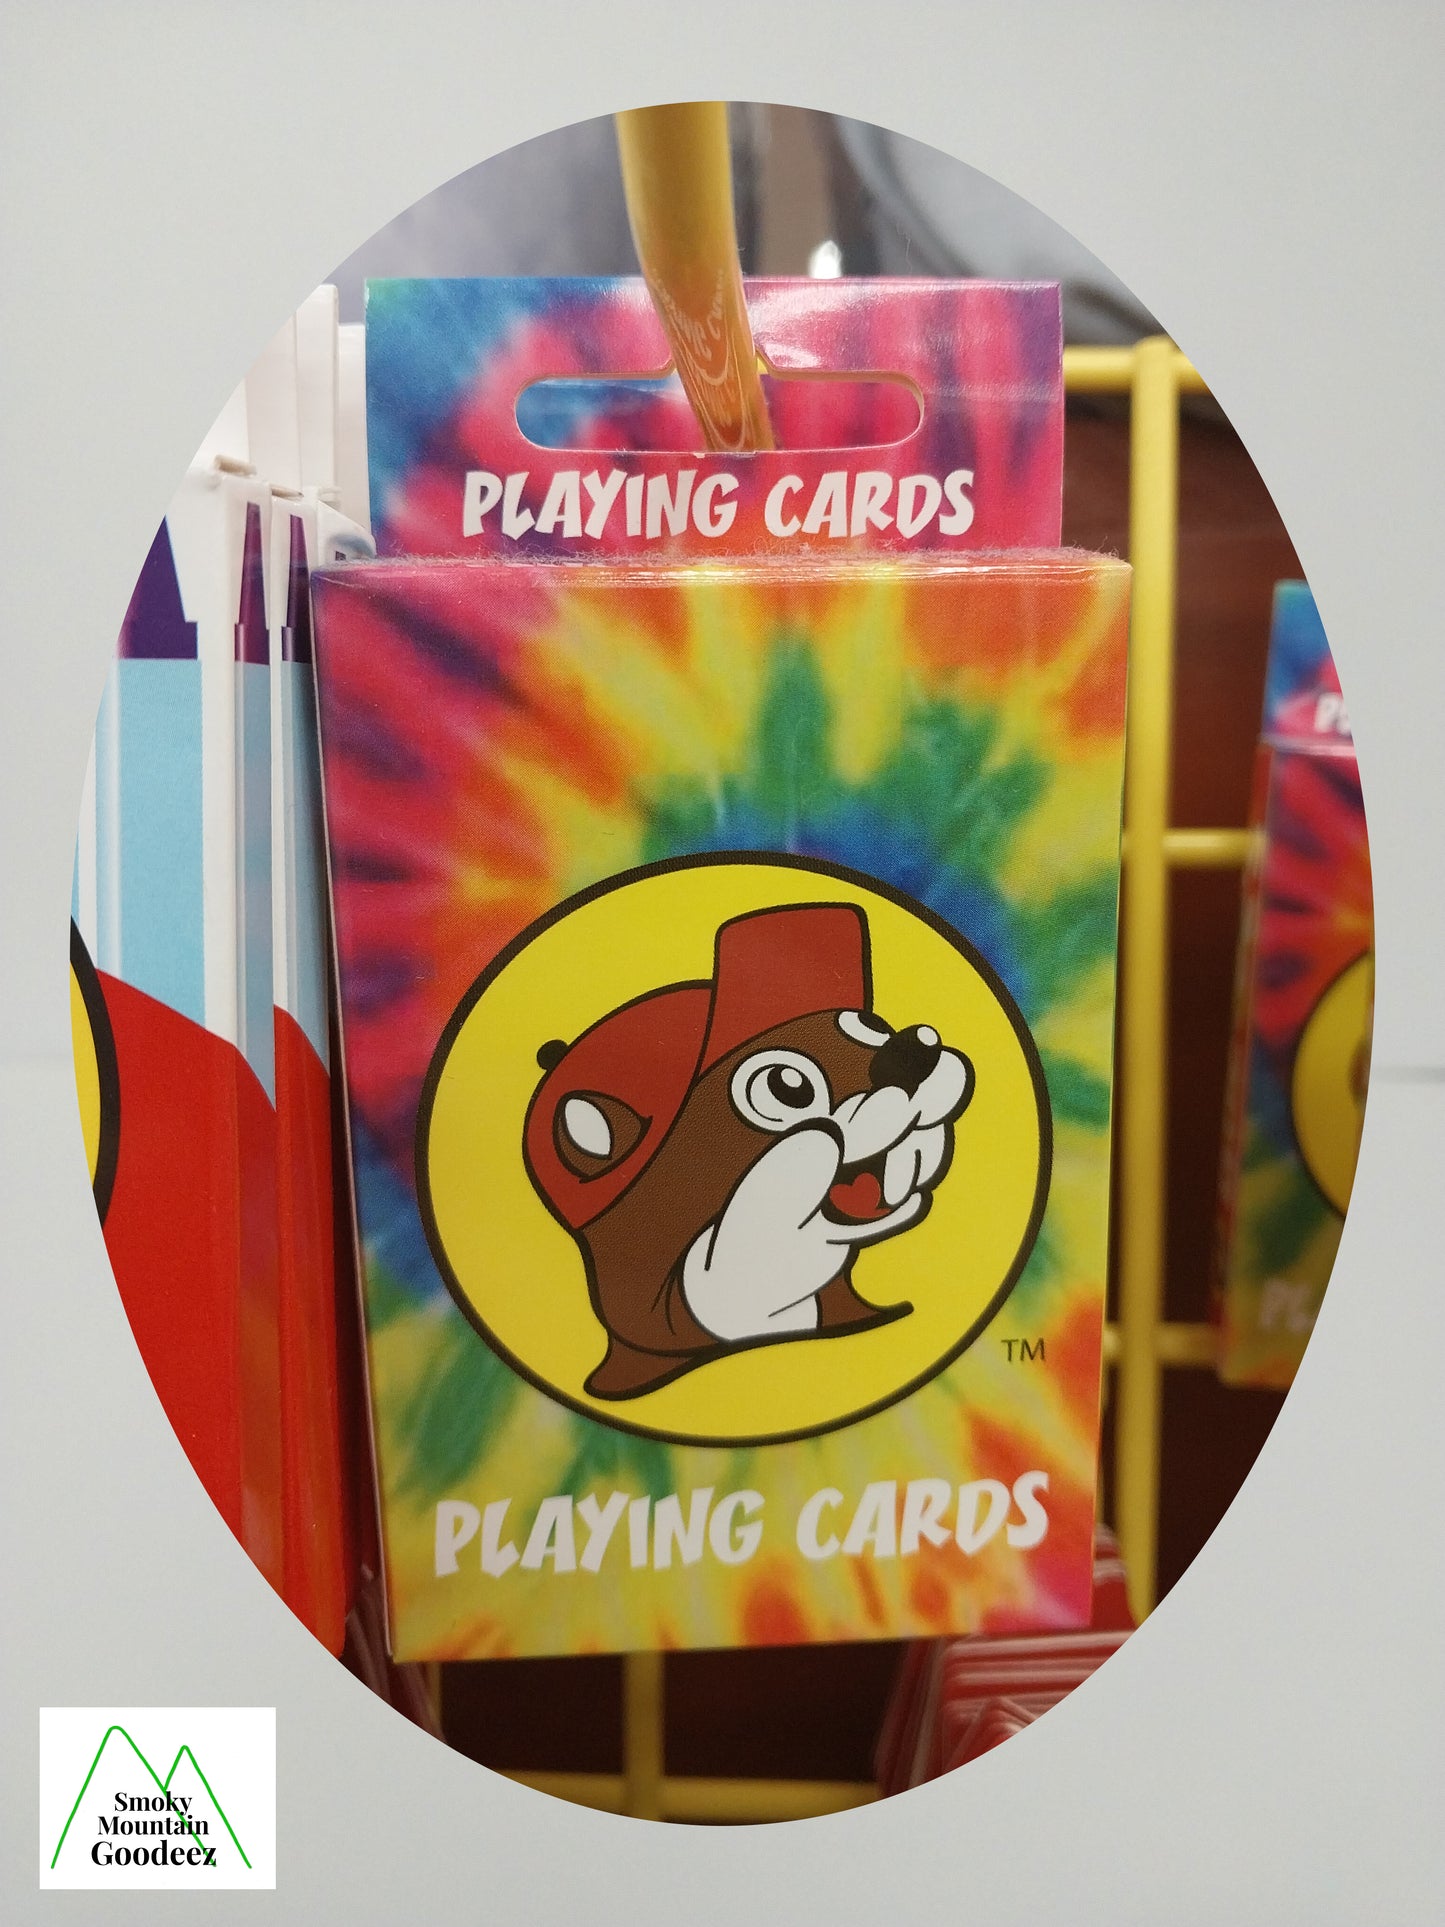 Buc-ee's Tie Dye Deck of Playing Cards